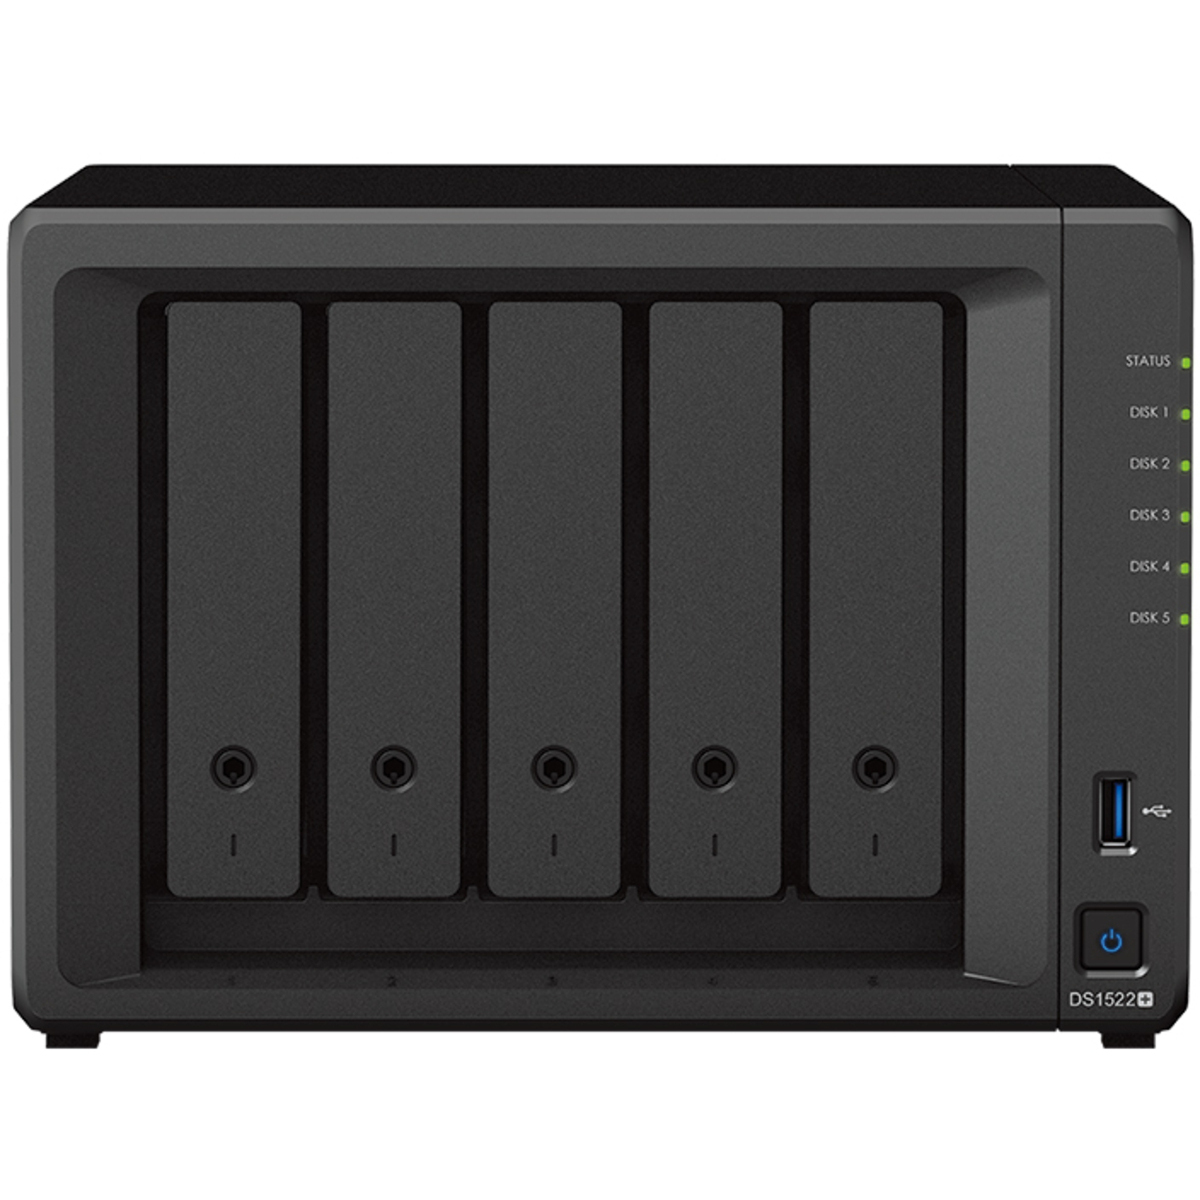 buy Synology DiskStation DS1522+ 120tb Desktop NAS - Network Attached Storage Device 5x24000gb Western Digital Ultrastar HC580 WUH722424ALE6L4 3.5 7200rpm SATA 6Gb/s HDD ENTERPRISE Class Drives Installed - Burn-In Tested - nas headquarters buy network attached storage server device das new raid-5 free shipping simply usa DiskStation DS1522+